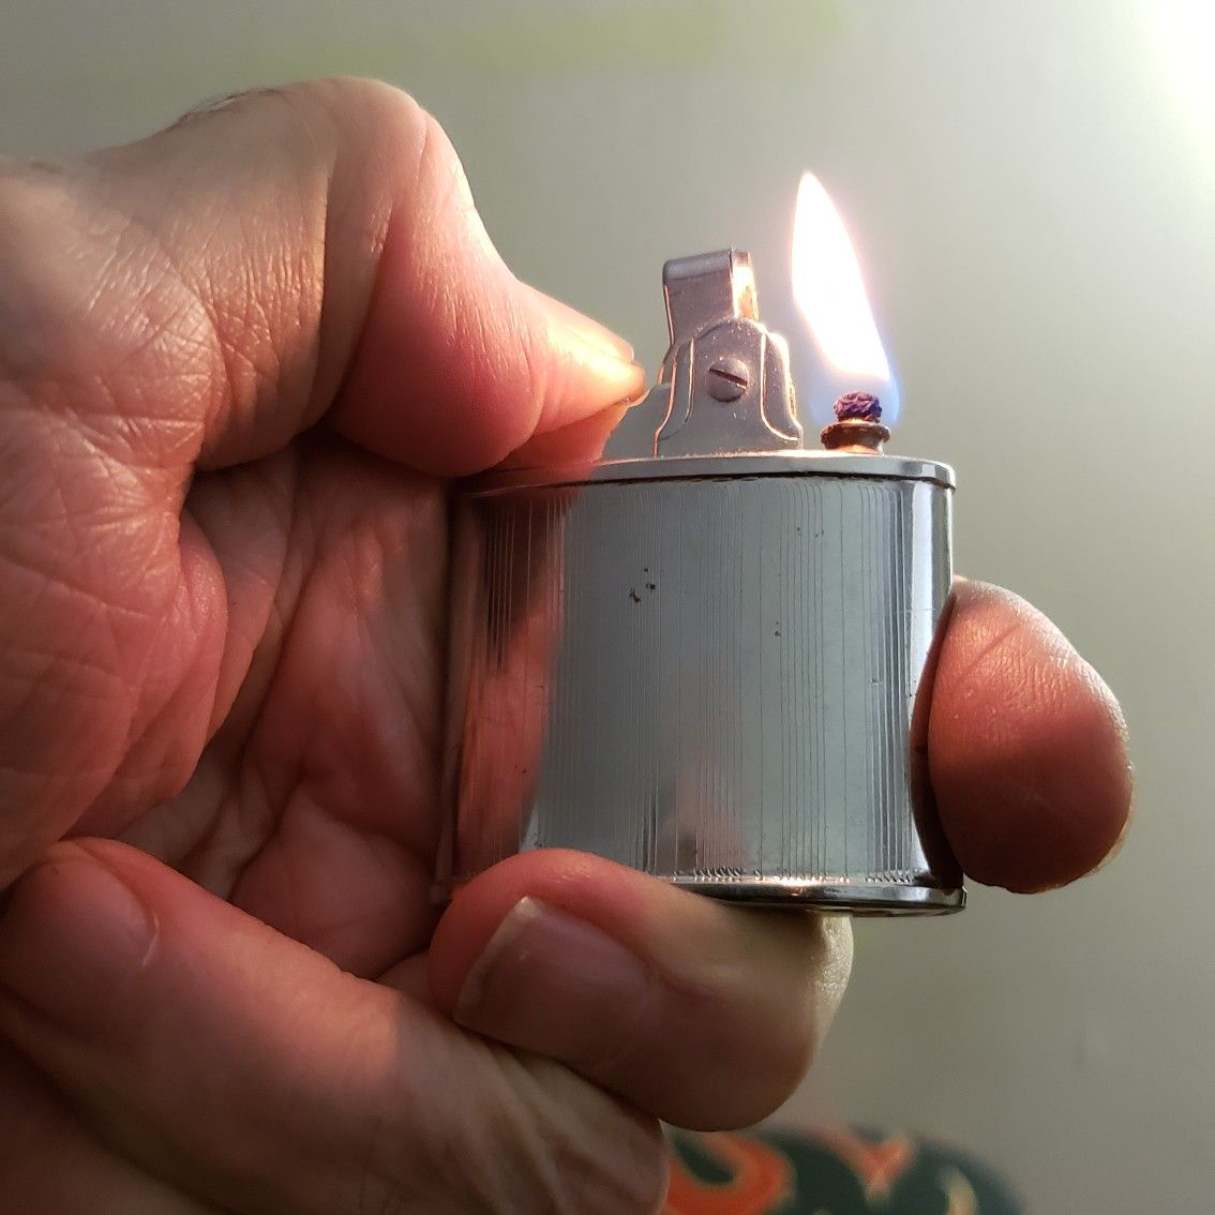 How To Store Lighters